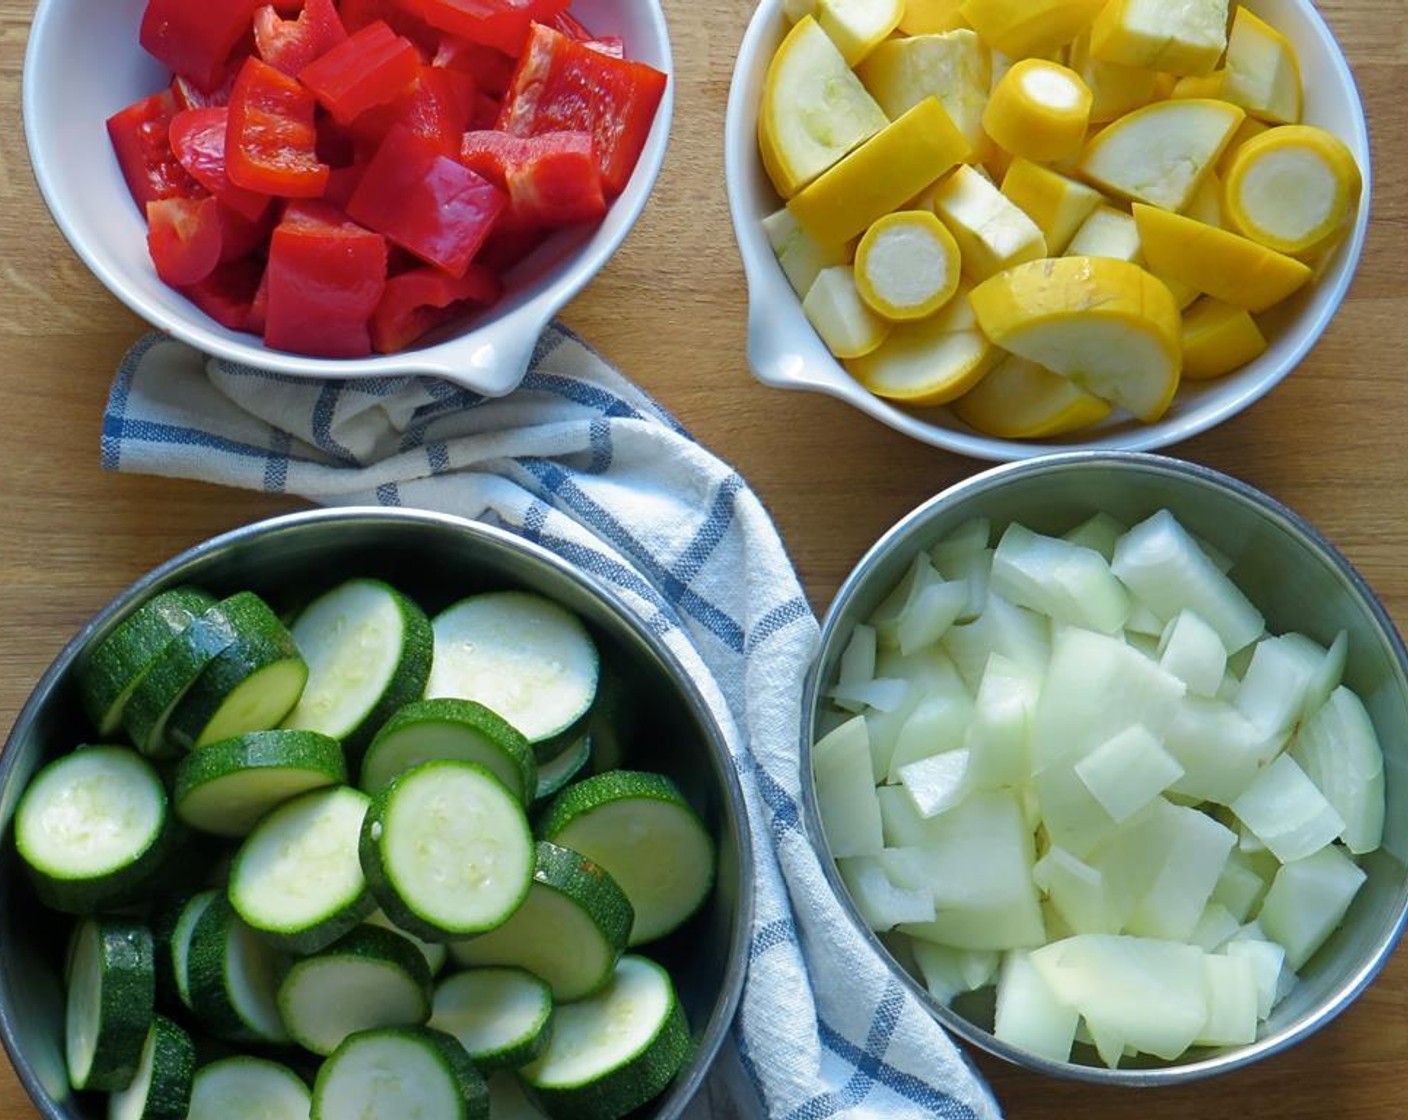 step 1 Cut the Red Bell Pepper (1), Zucchini (2), and Yellow Squash (2) into 1-inch pieces. Dice the Yellow Onion (1).